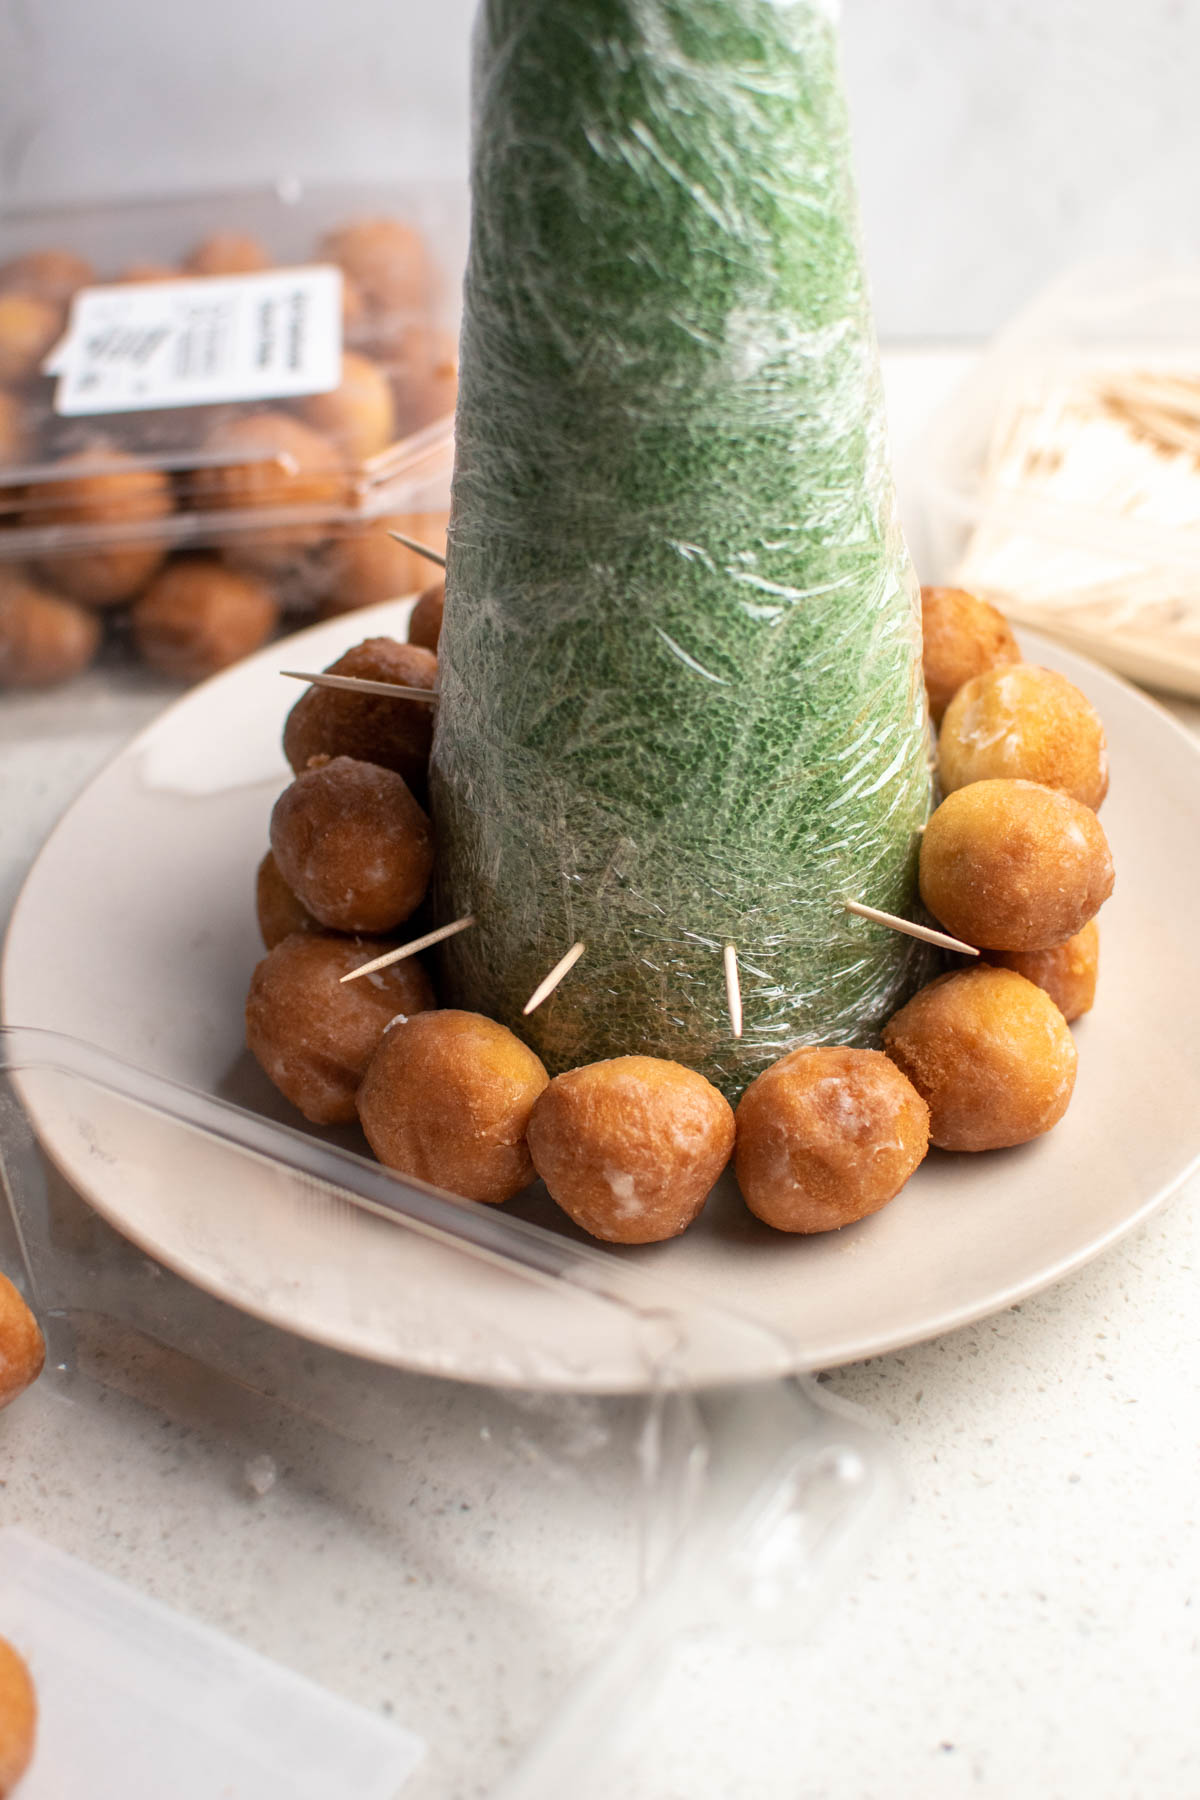 Donut holes on toothpicks sticking out of green styrofoam cone.